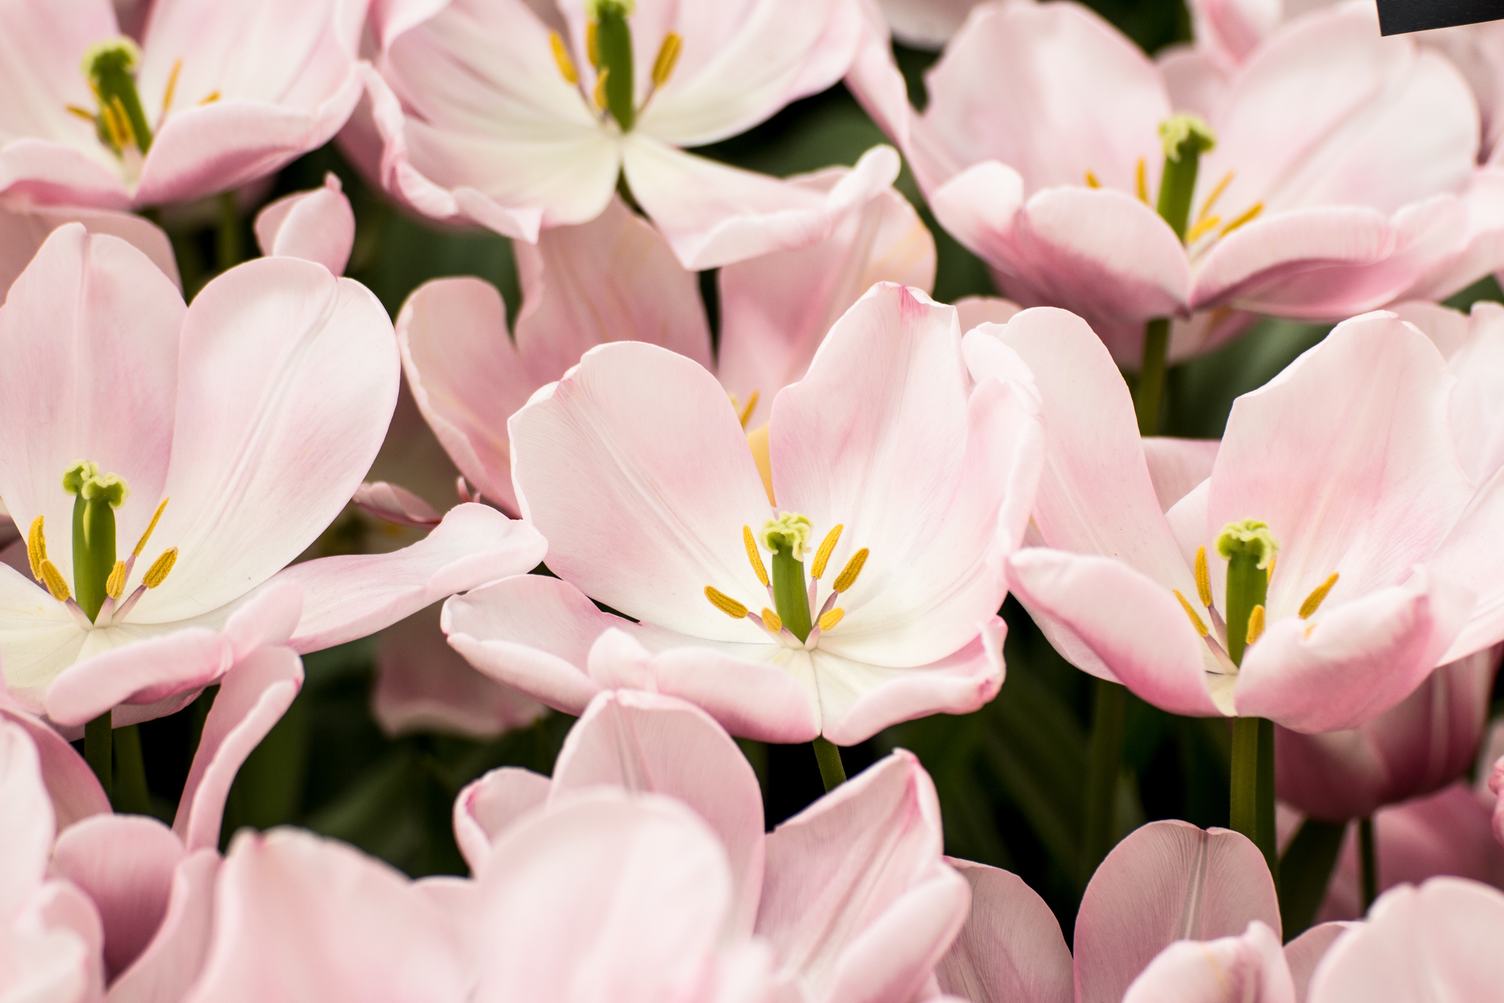 Light Pink Tulip Flowers Blooming on the Field